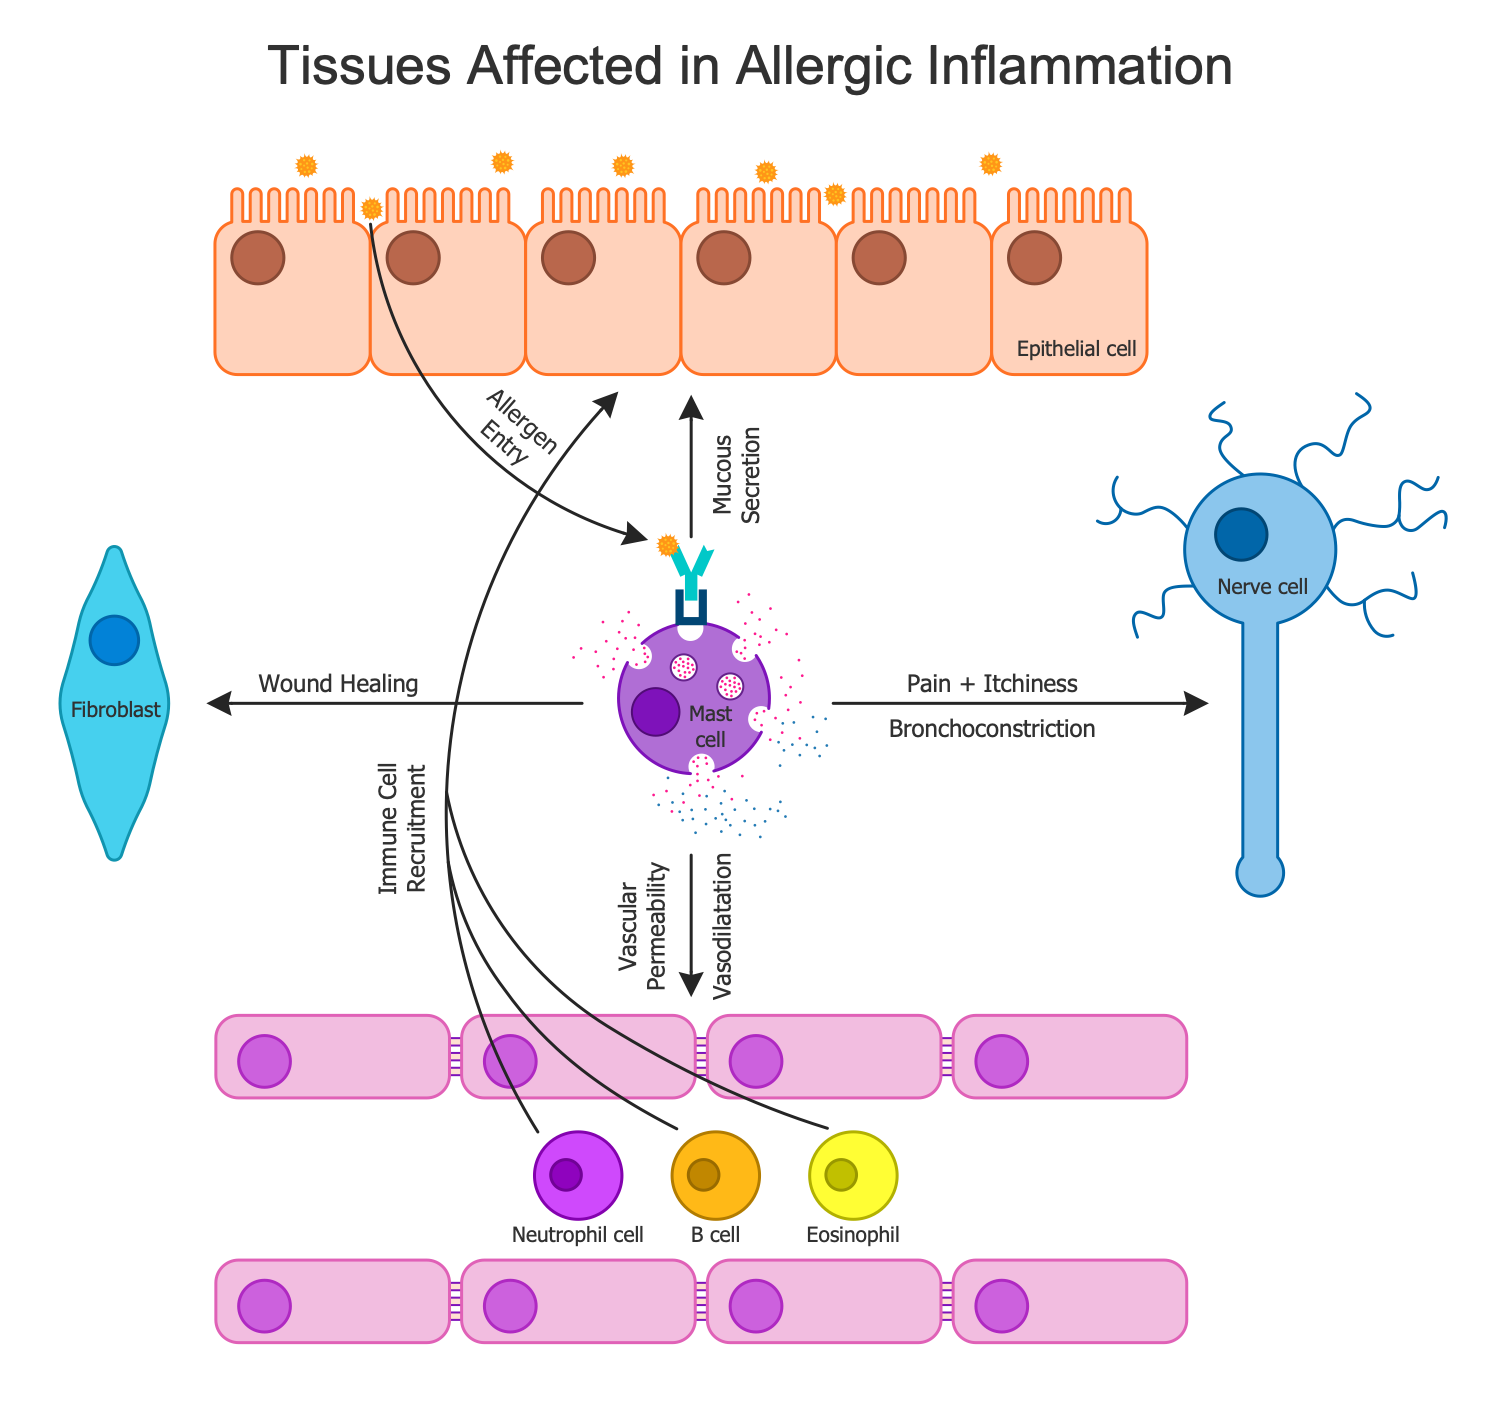 Tissues Affected in Allergic Inflammation